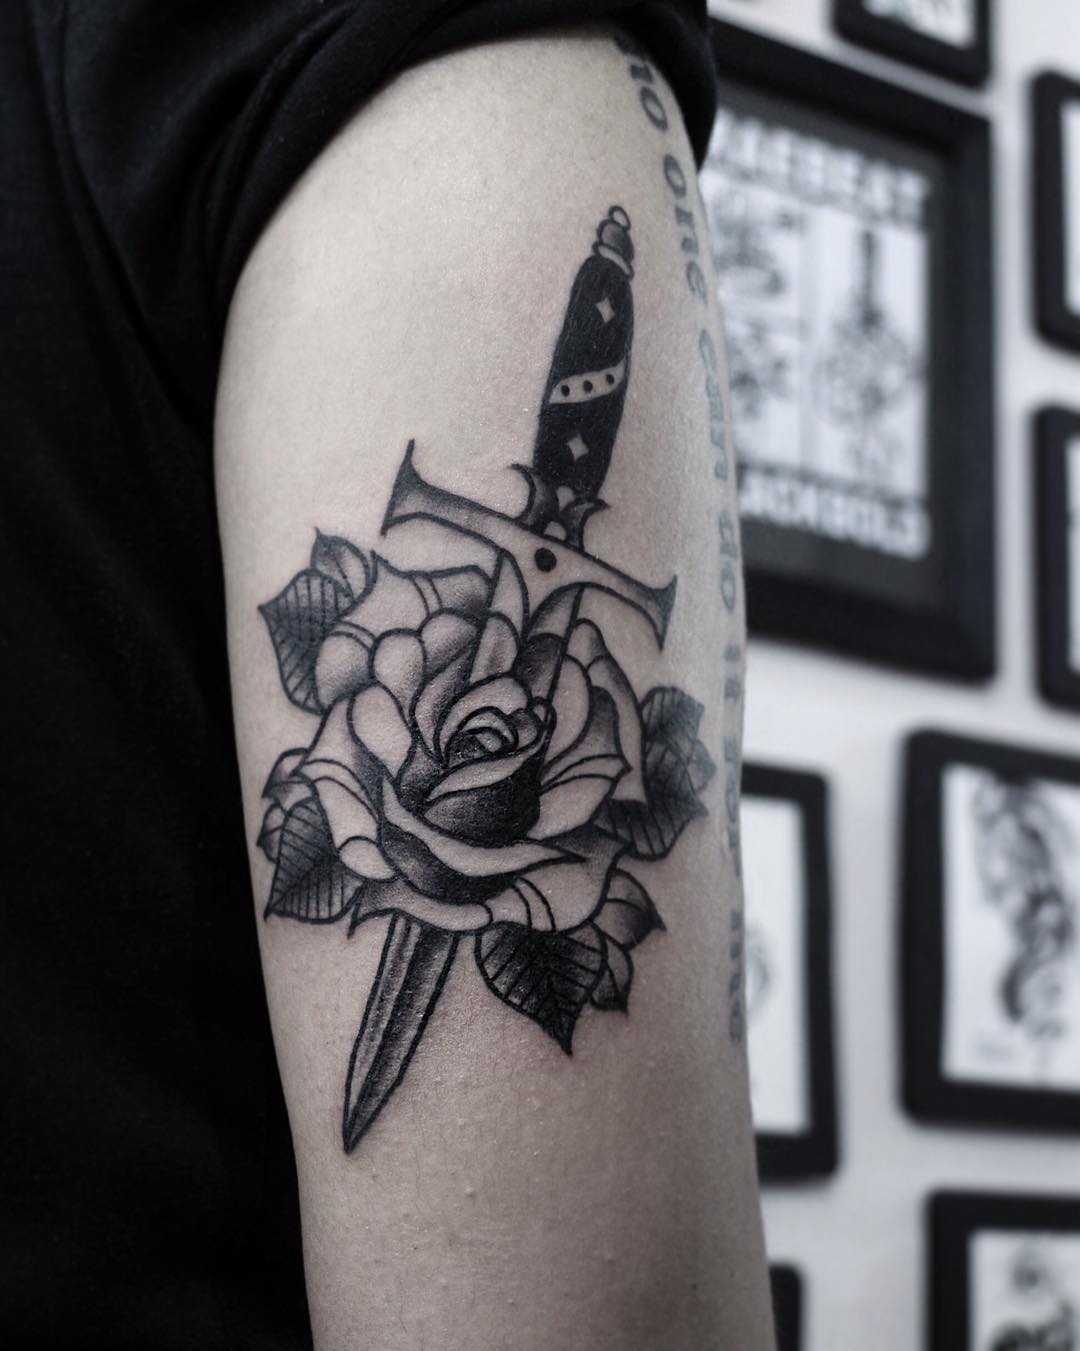 Dagger and rose tattoo by Rae Beat